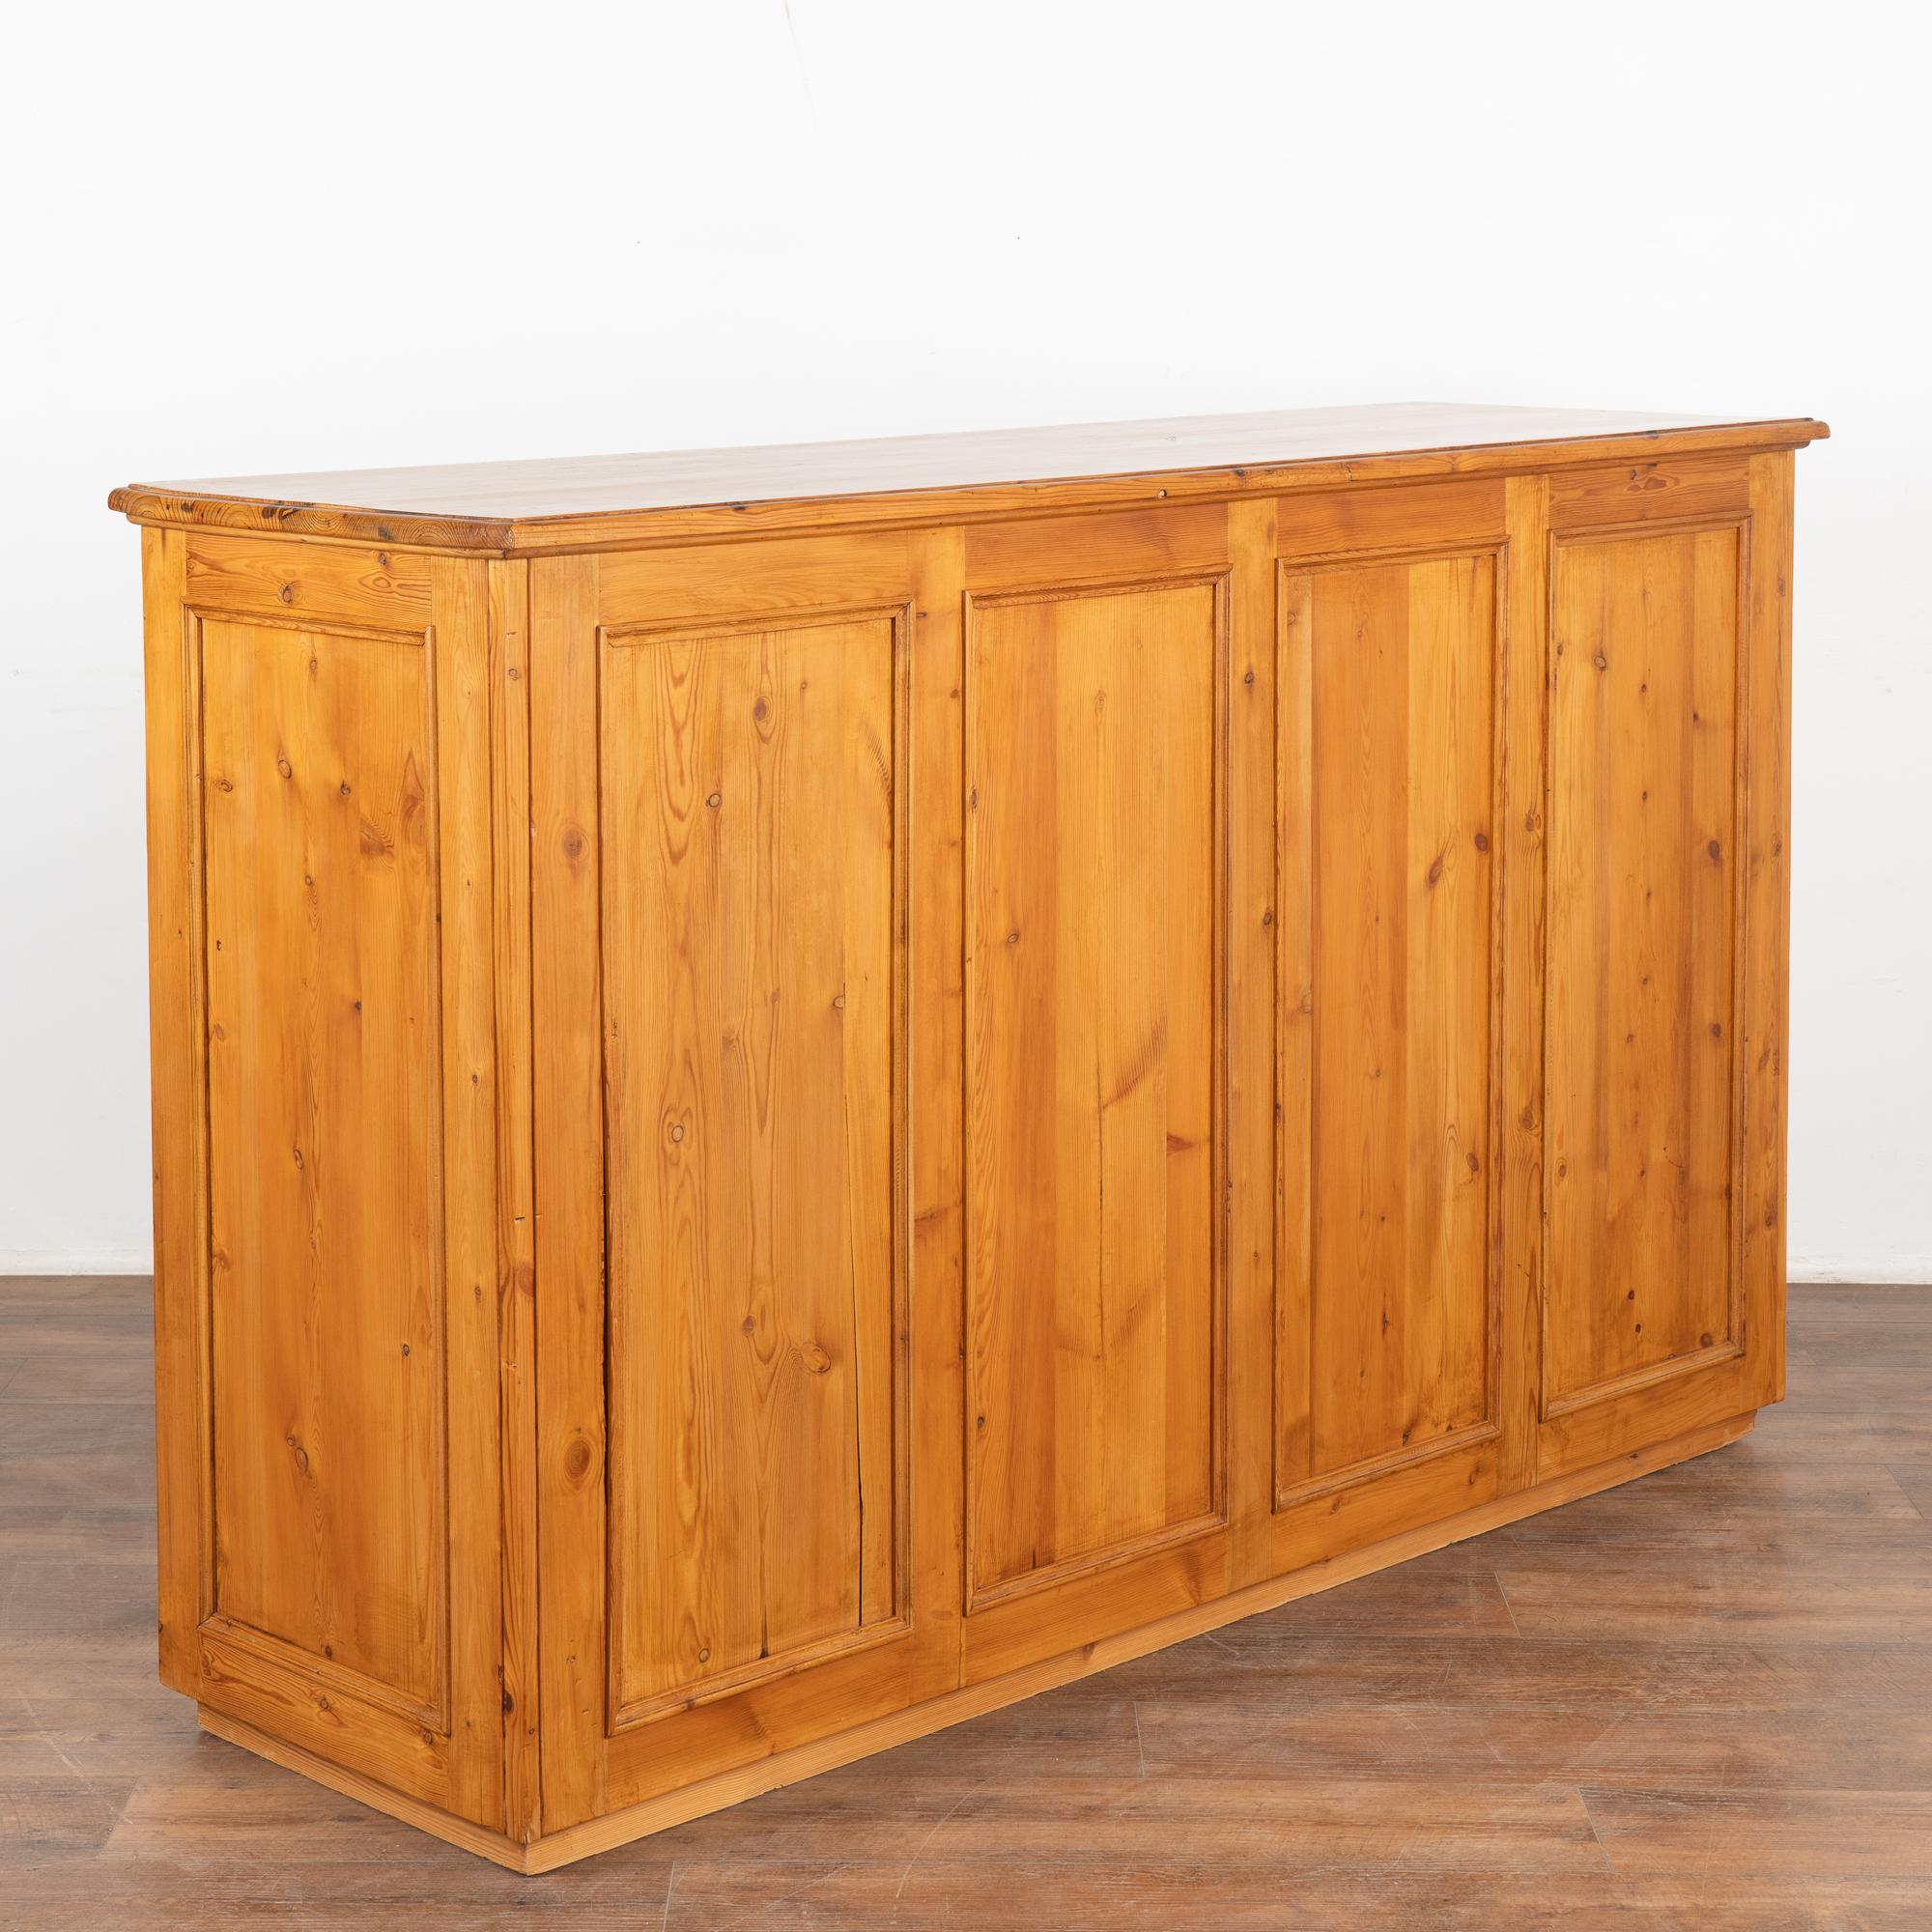 Free Standing Pine Apothecary Counter with 64 Drawers, Kitchen Island circa 1900 For Sale 1